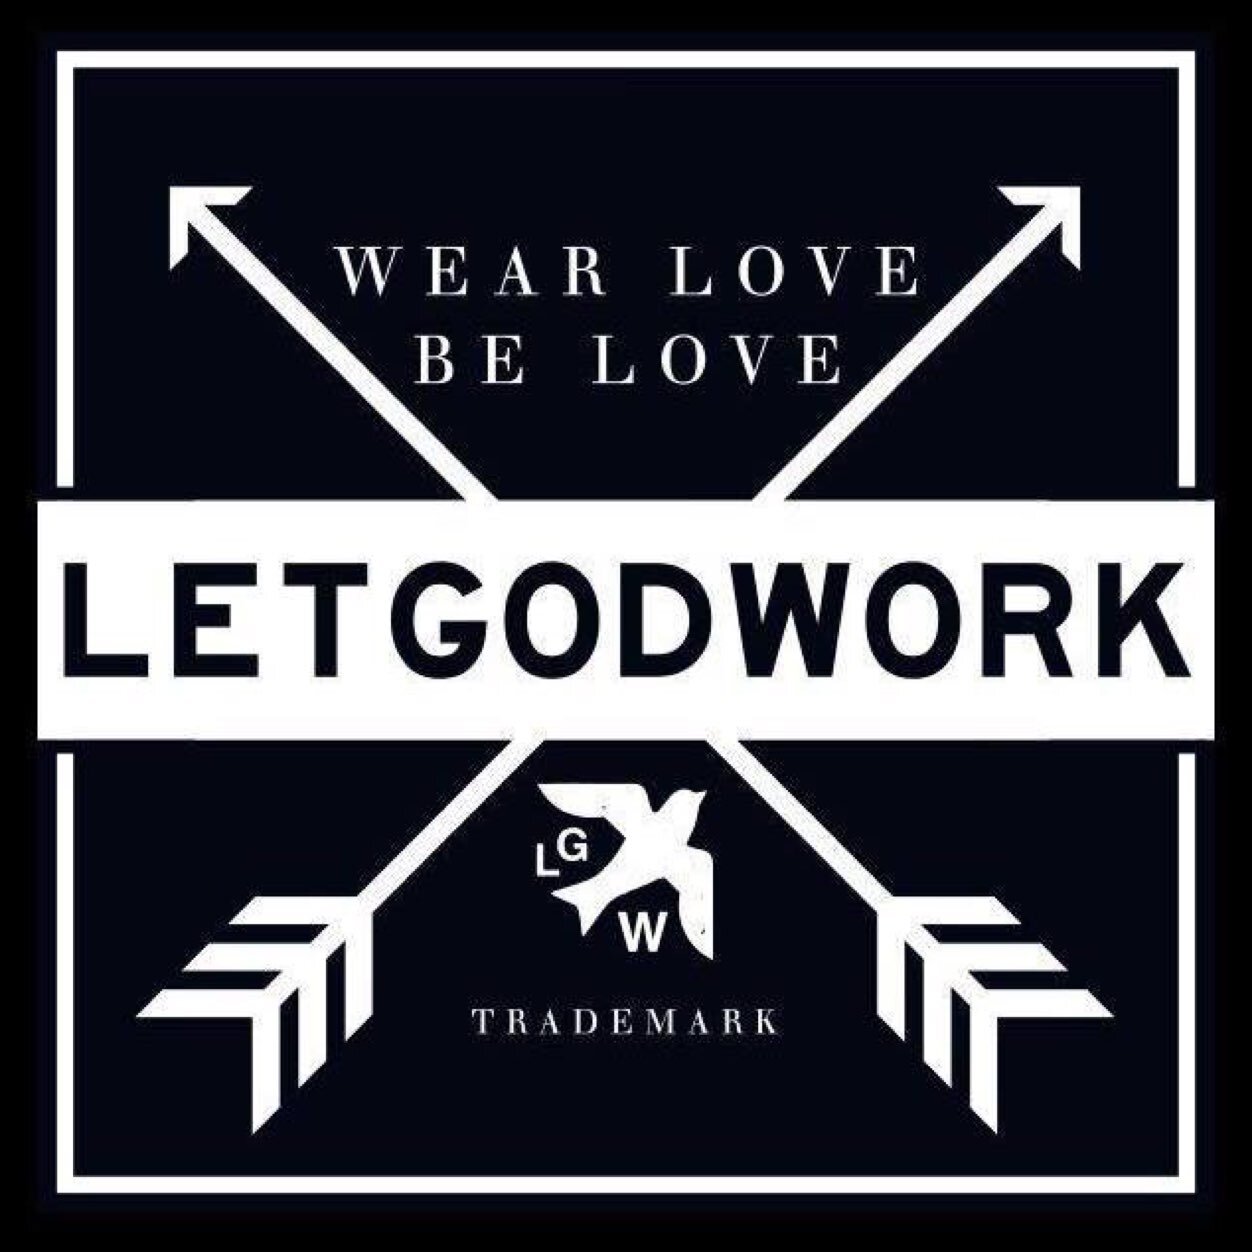 Orange County based brand founded in 2009 by some friends that wanted to make simple, clean, high-quality stuff that they could be proud of. #LGW